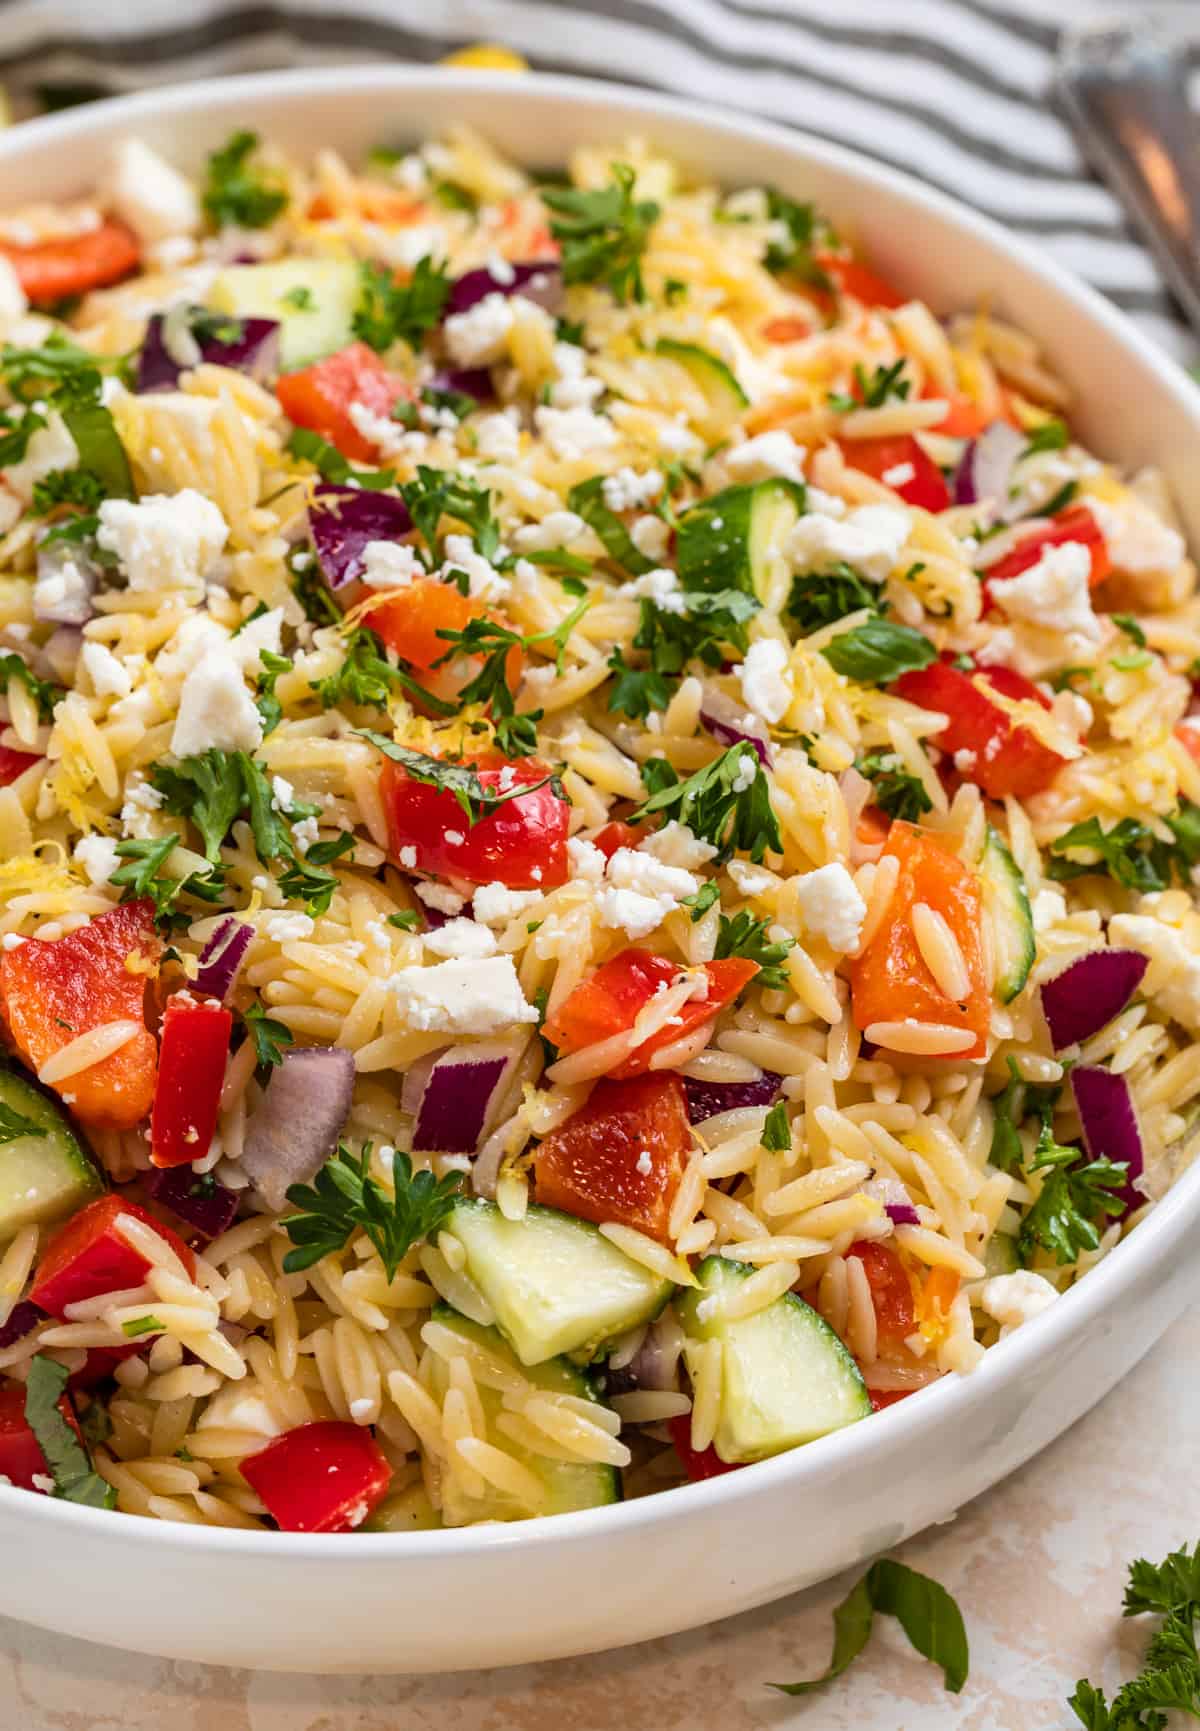 Orzo salad with feta, basil, parsley, cucumbers and more in white bowl.